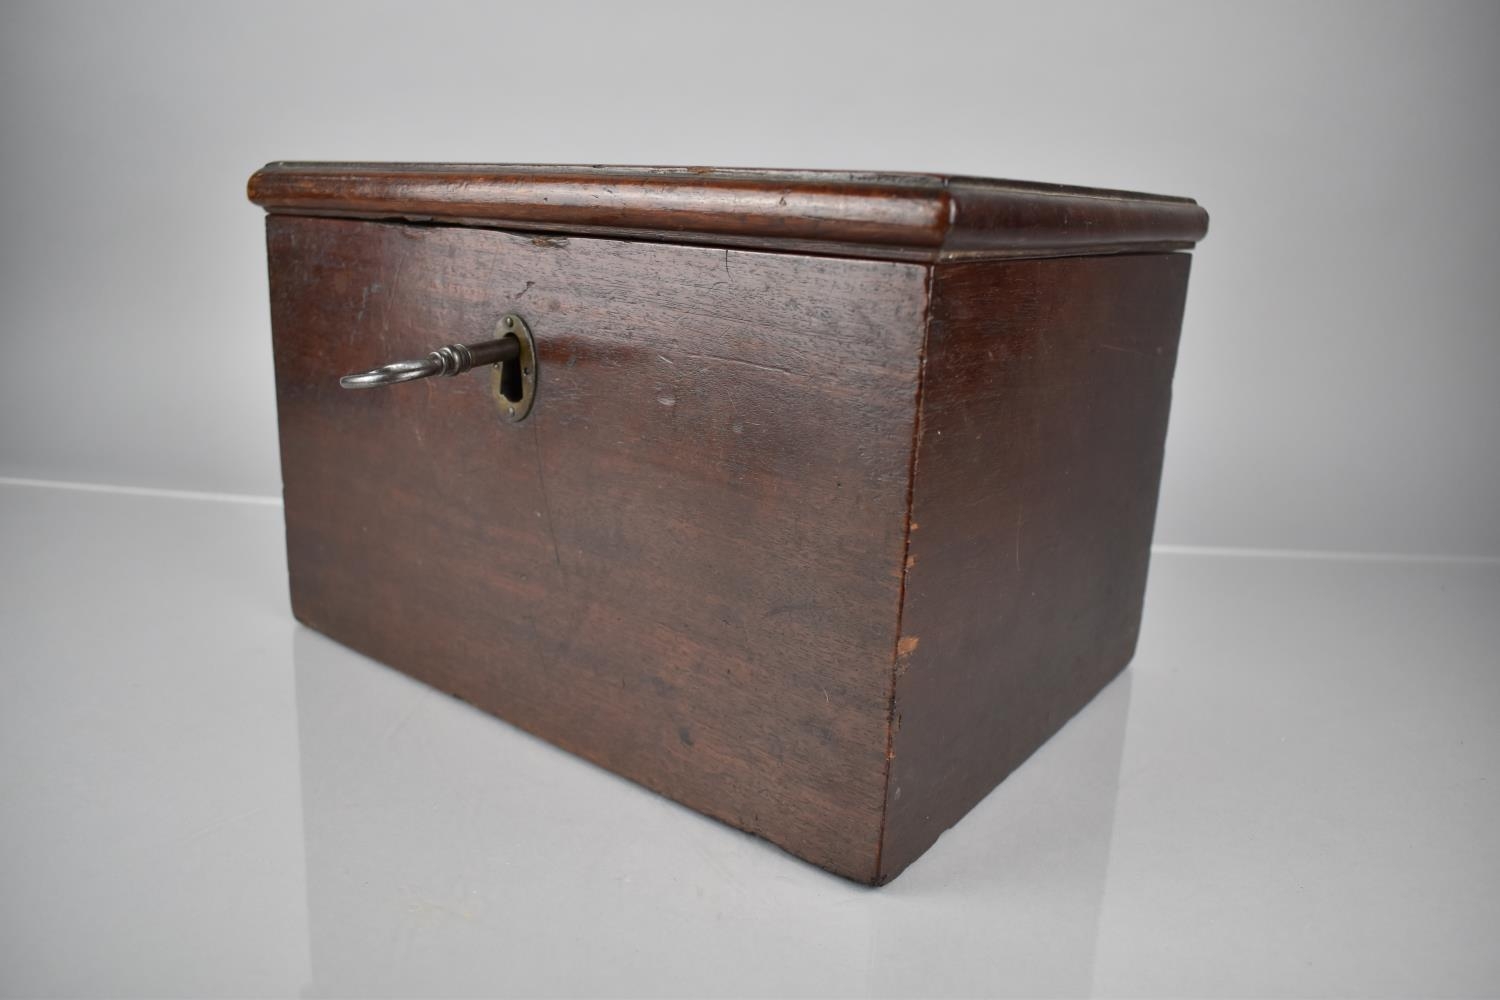 An Early 19th Century Mahogany Box with Hinged Lid with Original Lock and Key, 30x22x19cm High - Image 3 of 4